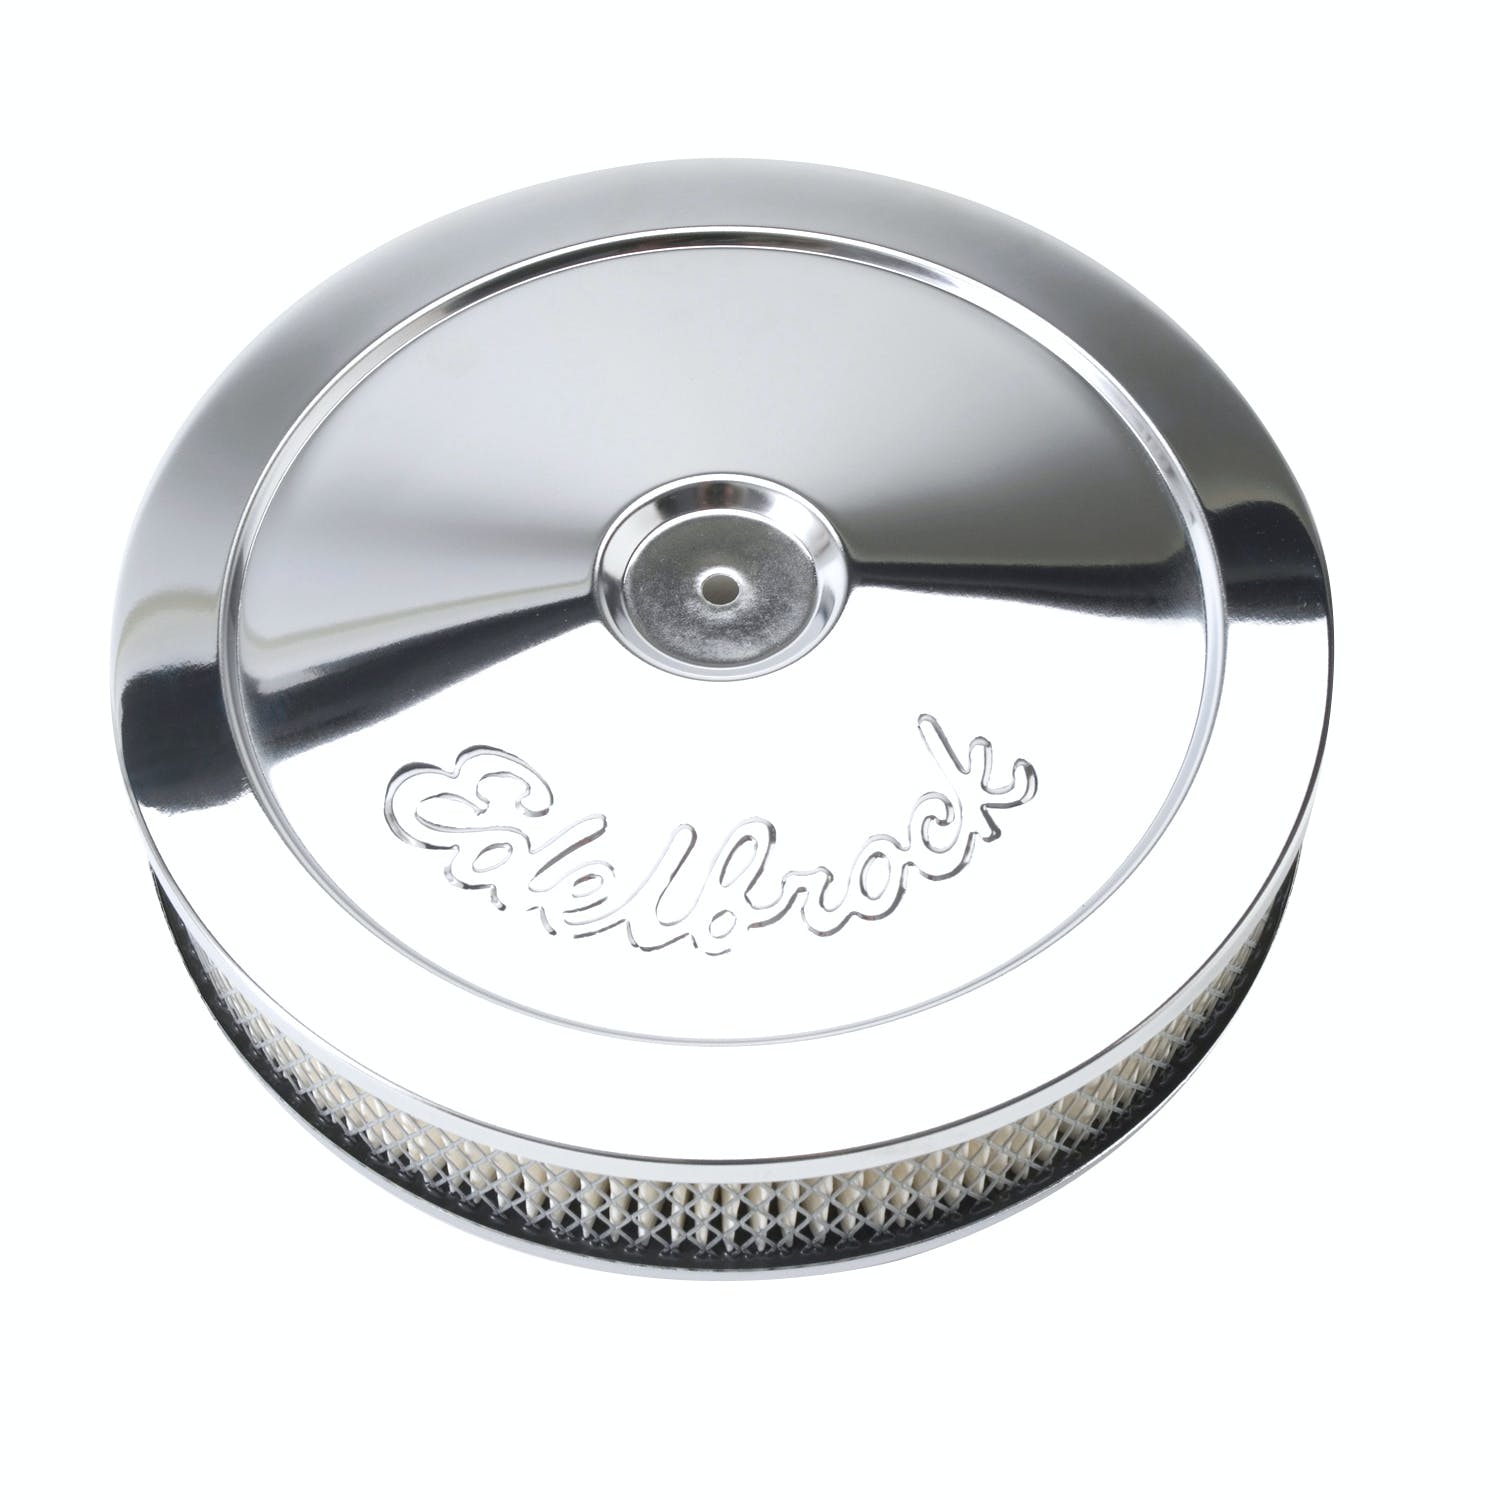 Edelbrock 1208 Pro-Flo Chrome 10 Round Air Cleaner with 2 Paper Element (Deep Flange)